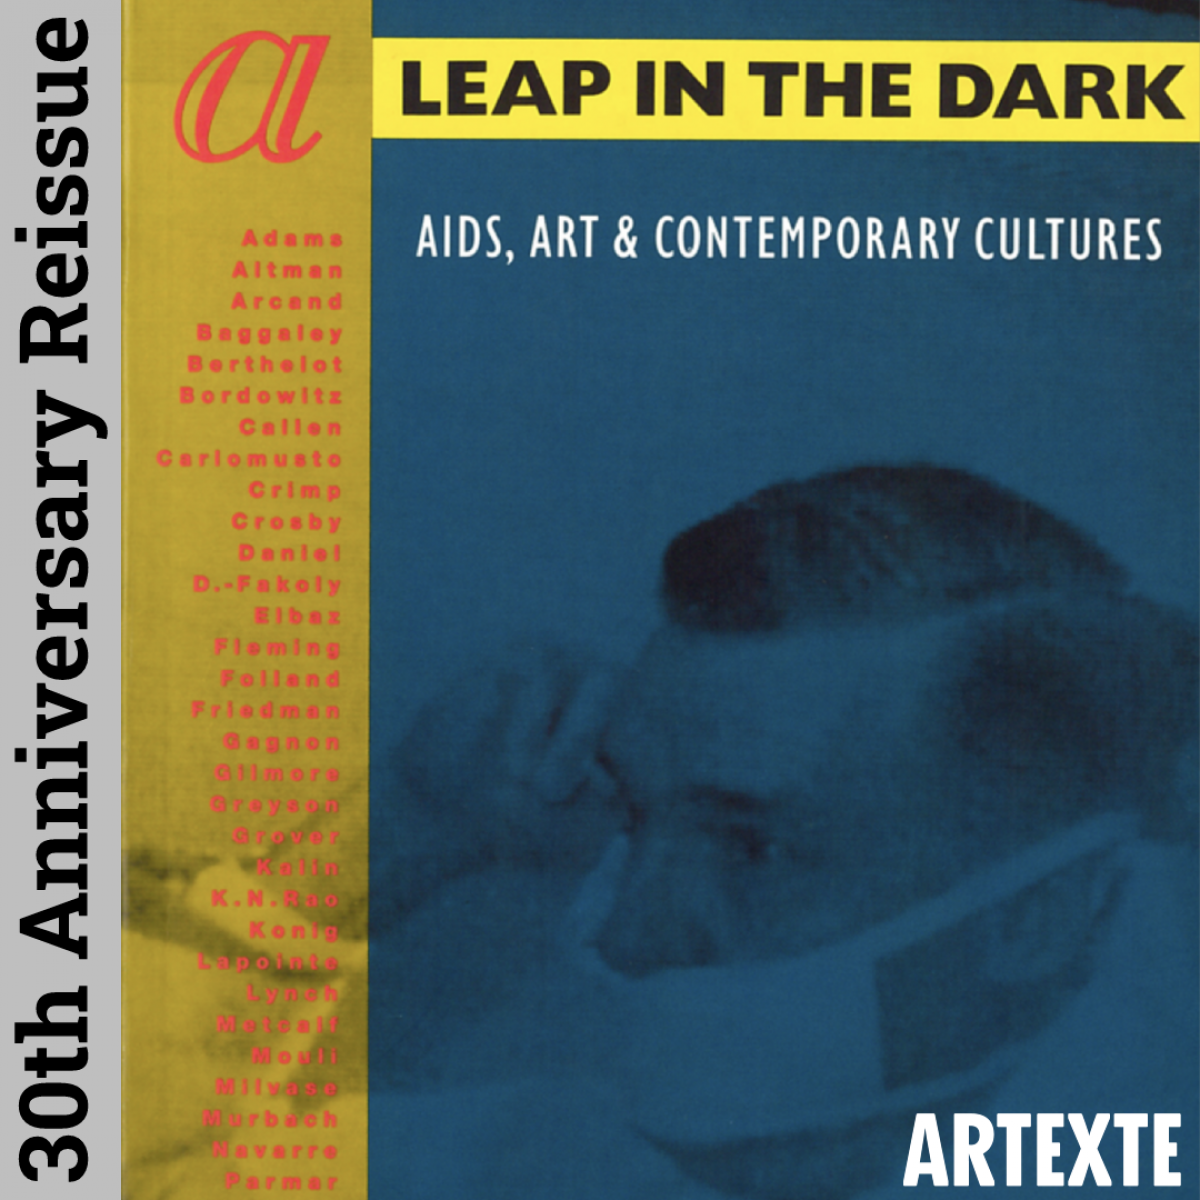 A square book cover with the title text "A Leap in the Dark" written in black and yellow all caps font at the top and a black and blue duotone photograph of a man wearing a surgical mask taking up the majority of the rest of the cover.